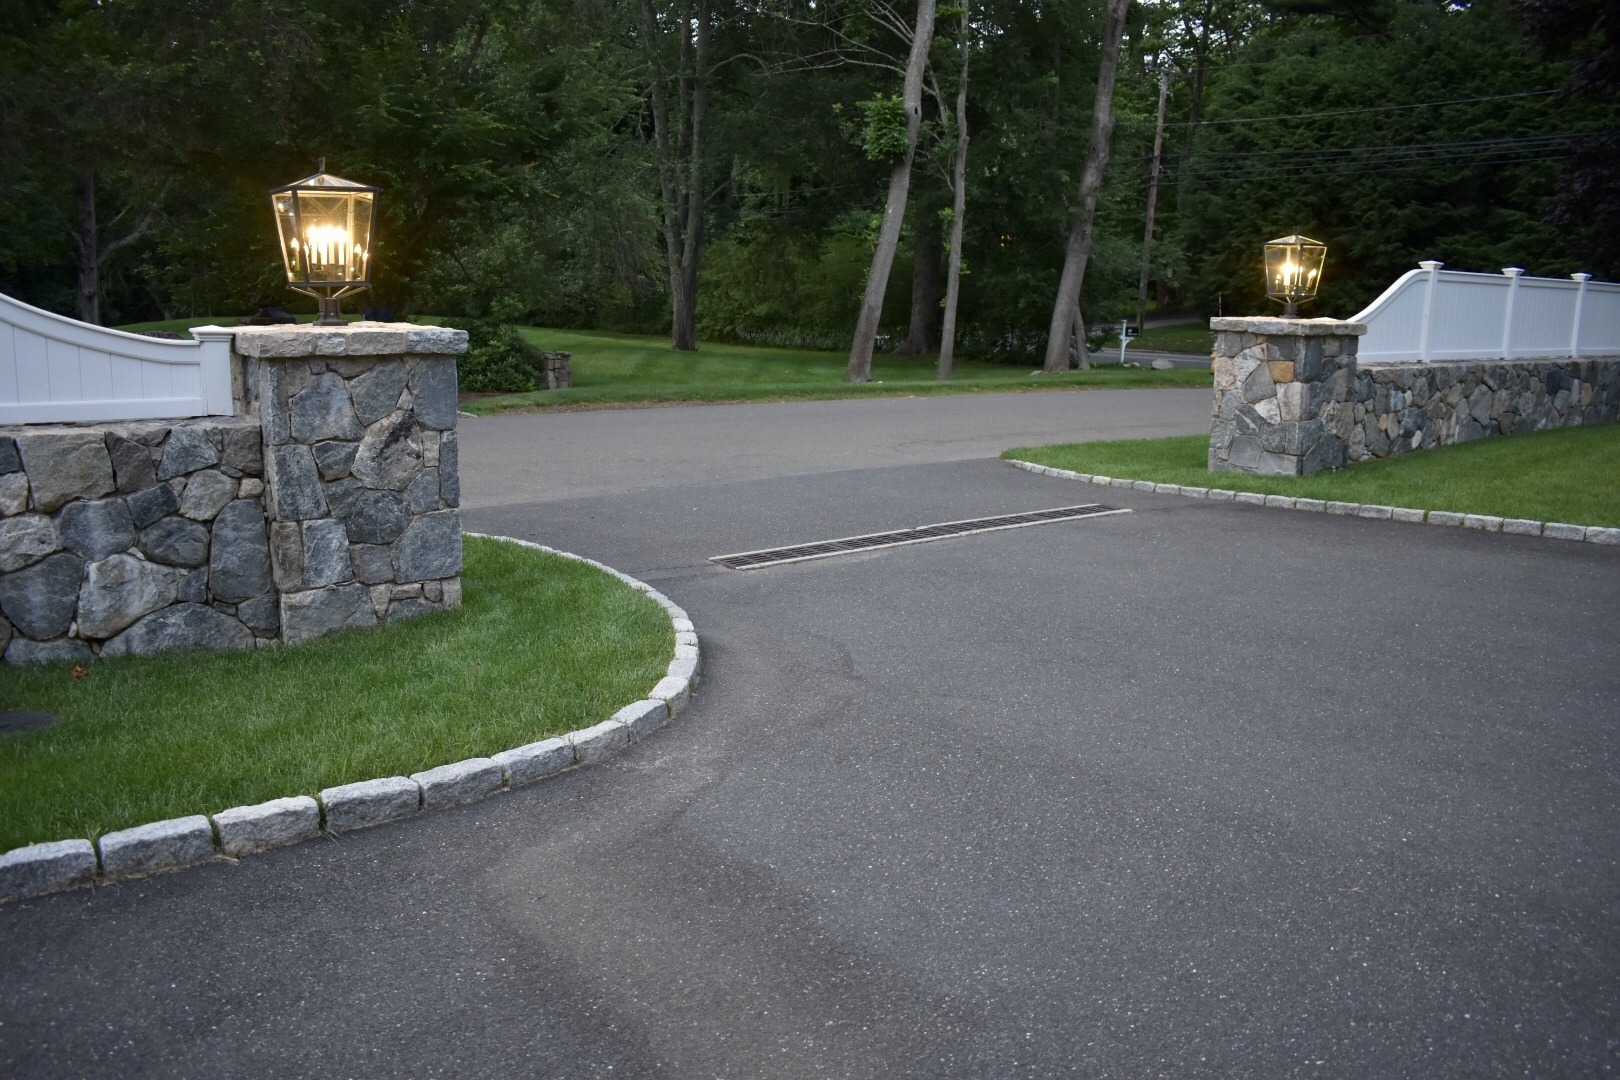 This image shows a driveway flanked by stone pillars with lit lanterns, a white fence, and trees in the background during the evening.